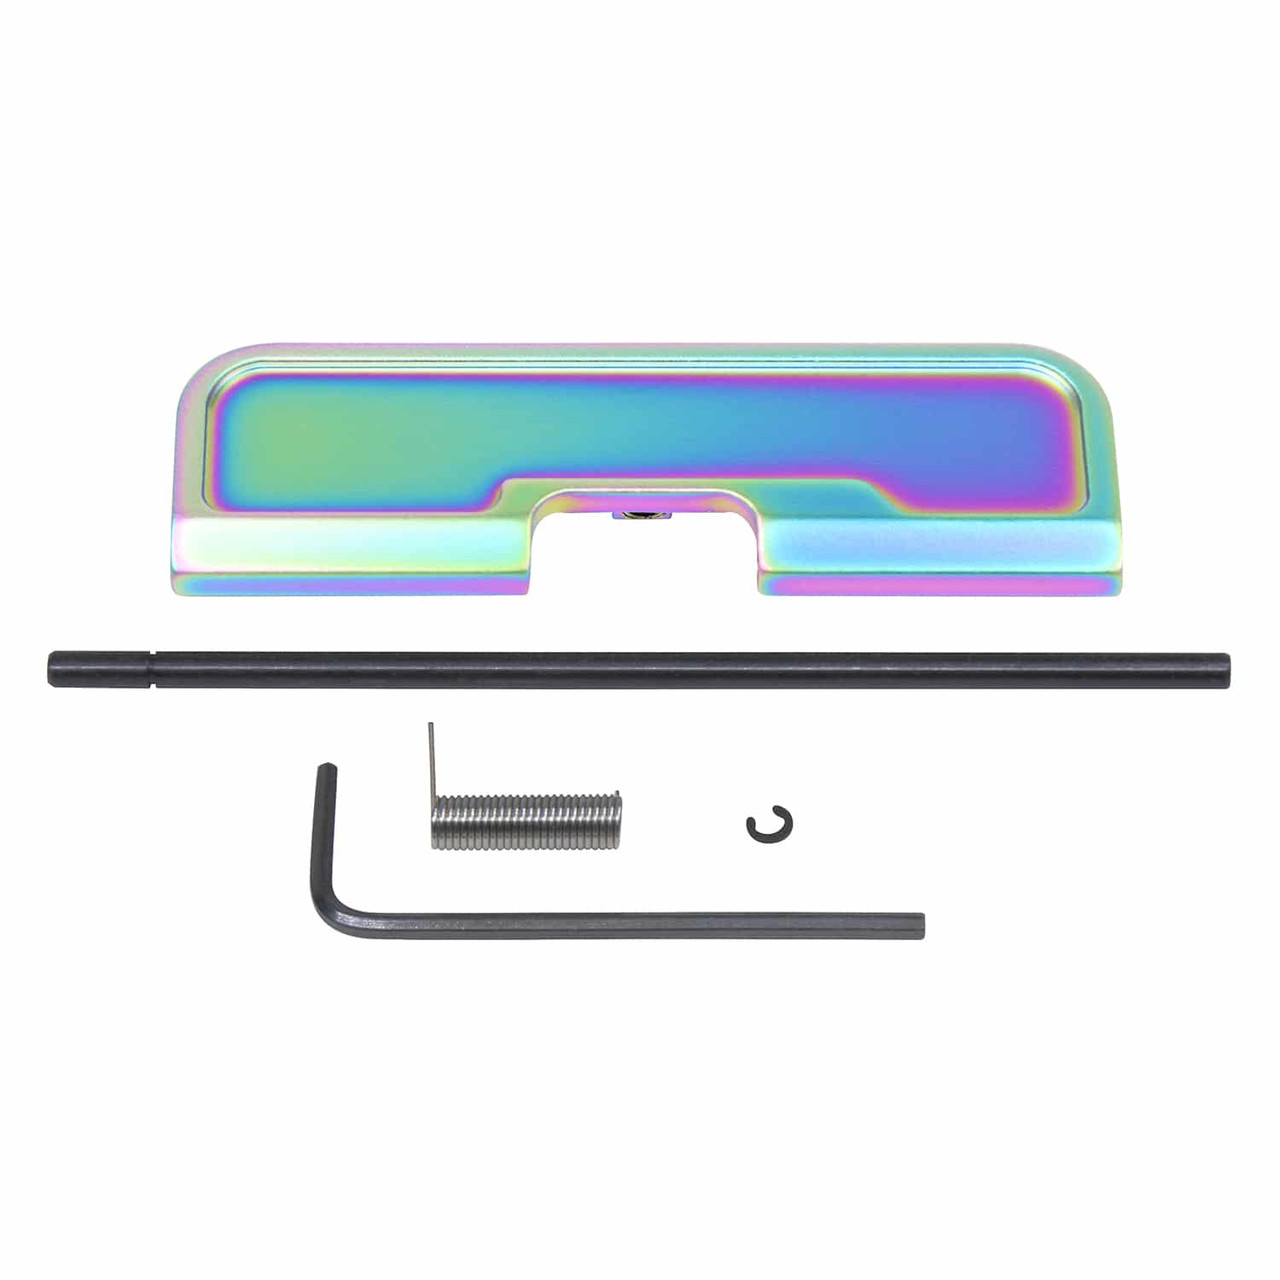 Guntec USA 223GATE-G3-M-RPVD Ejection Port Dust Cover Assembly (Gen 3) (Matte Rainbow PVD Coated)